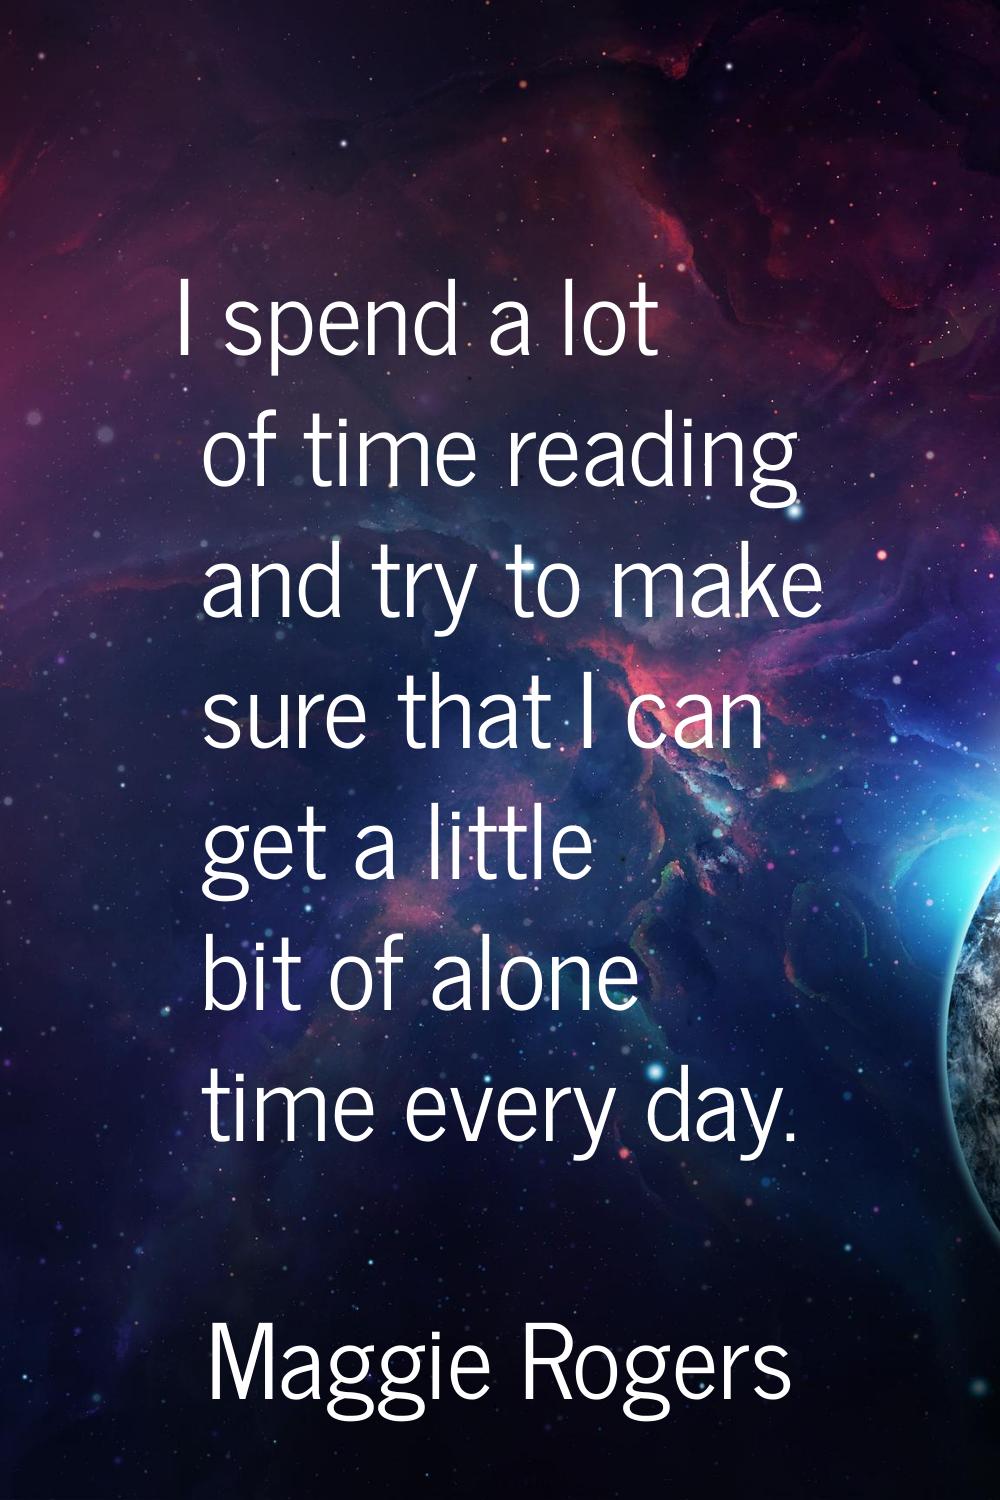 I spend a lot of time reading and try to make sure that I can get a little bit of alone time every 